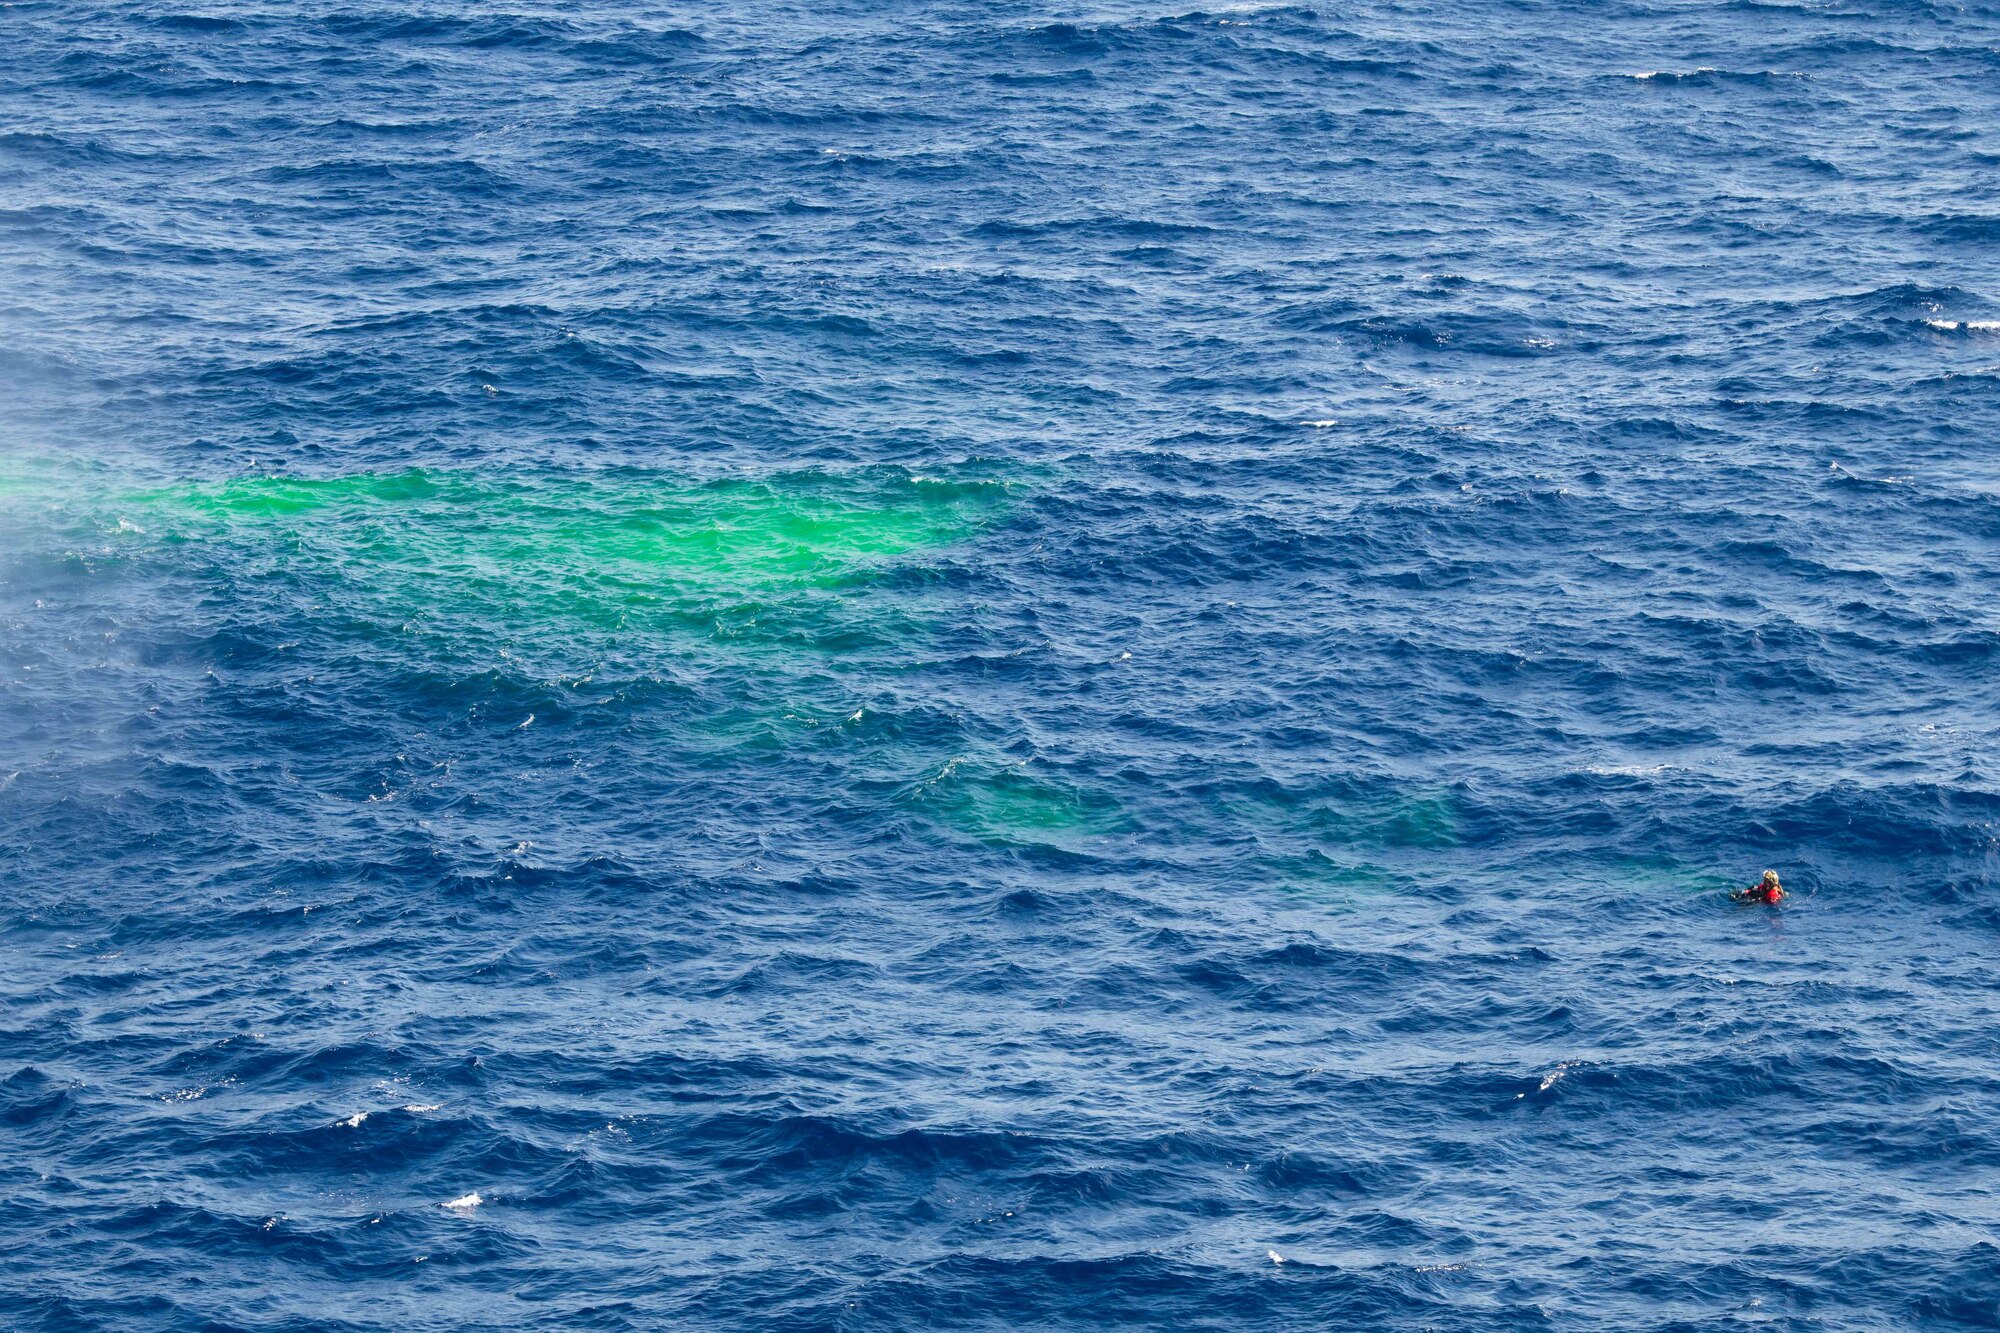 A diver floats in a sea next to dye waiting for rescue